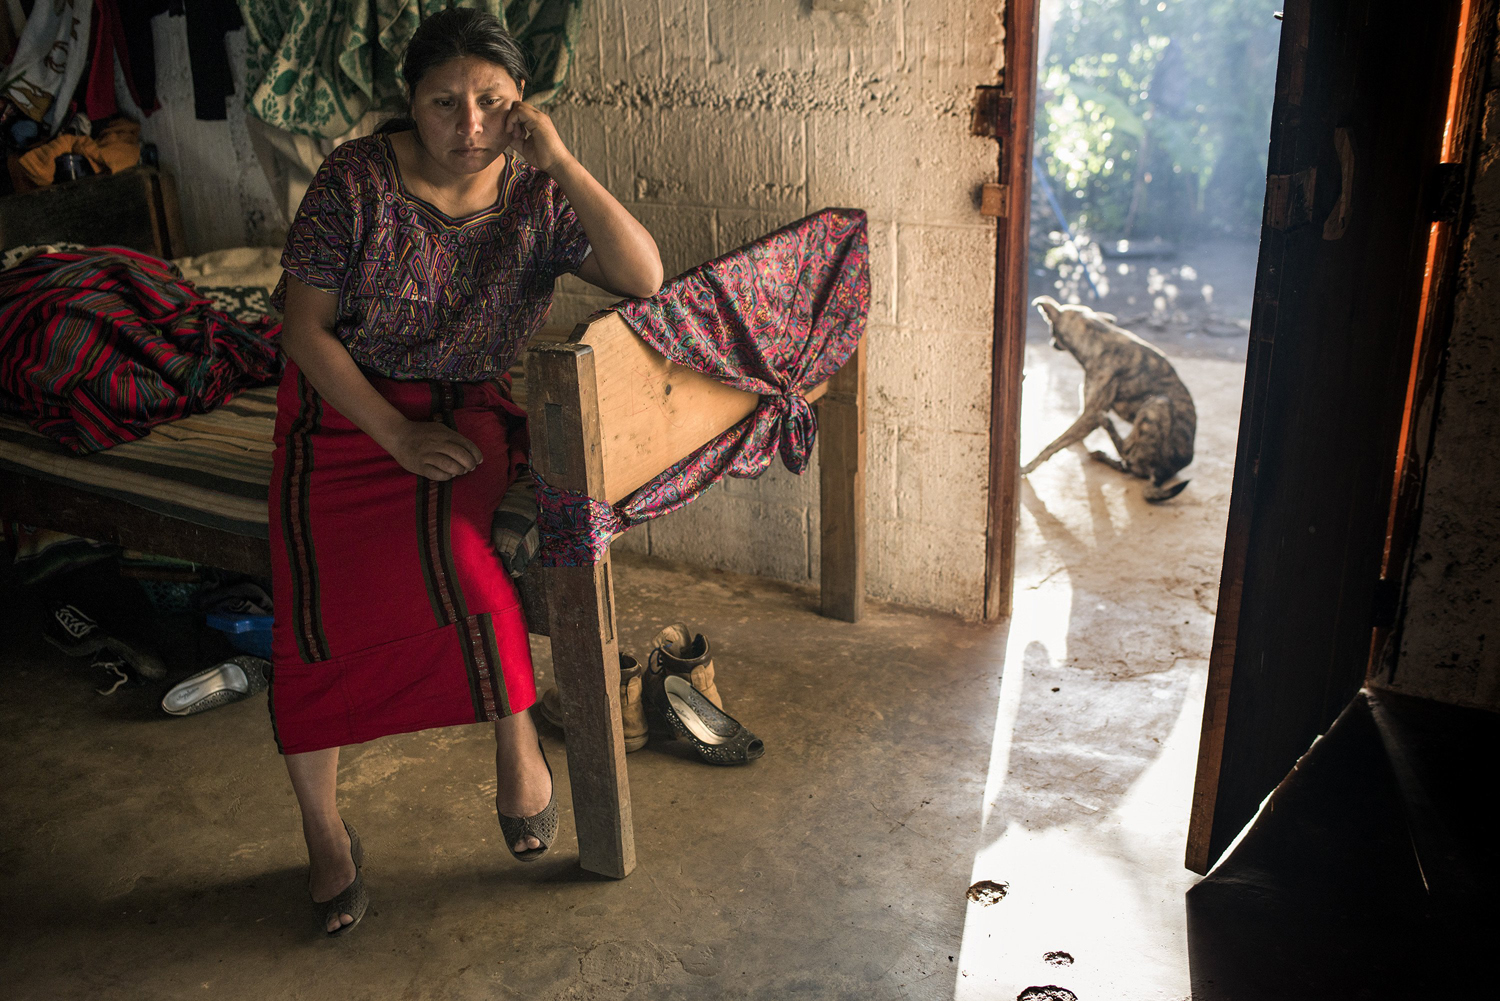 The mother of Cecilia, 16, a Guatemalan seeking a better life in the U.S., who fell prey to smugglers, in the home 10 family members share in El Paraiso, Guatemala, July 30, 2014.